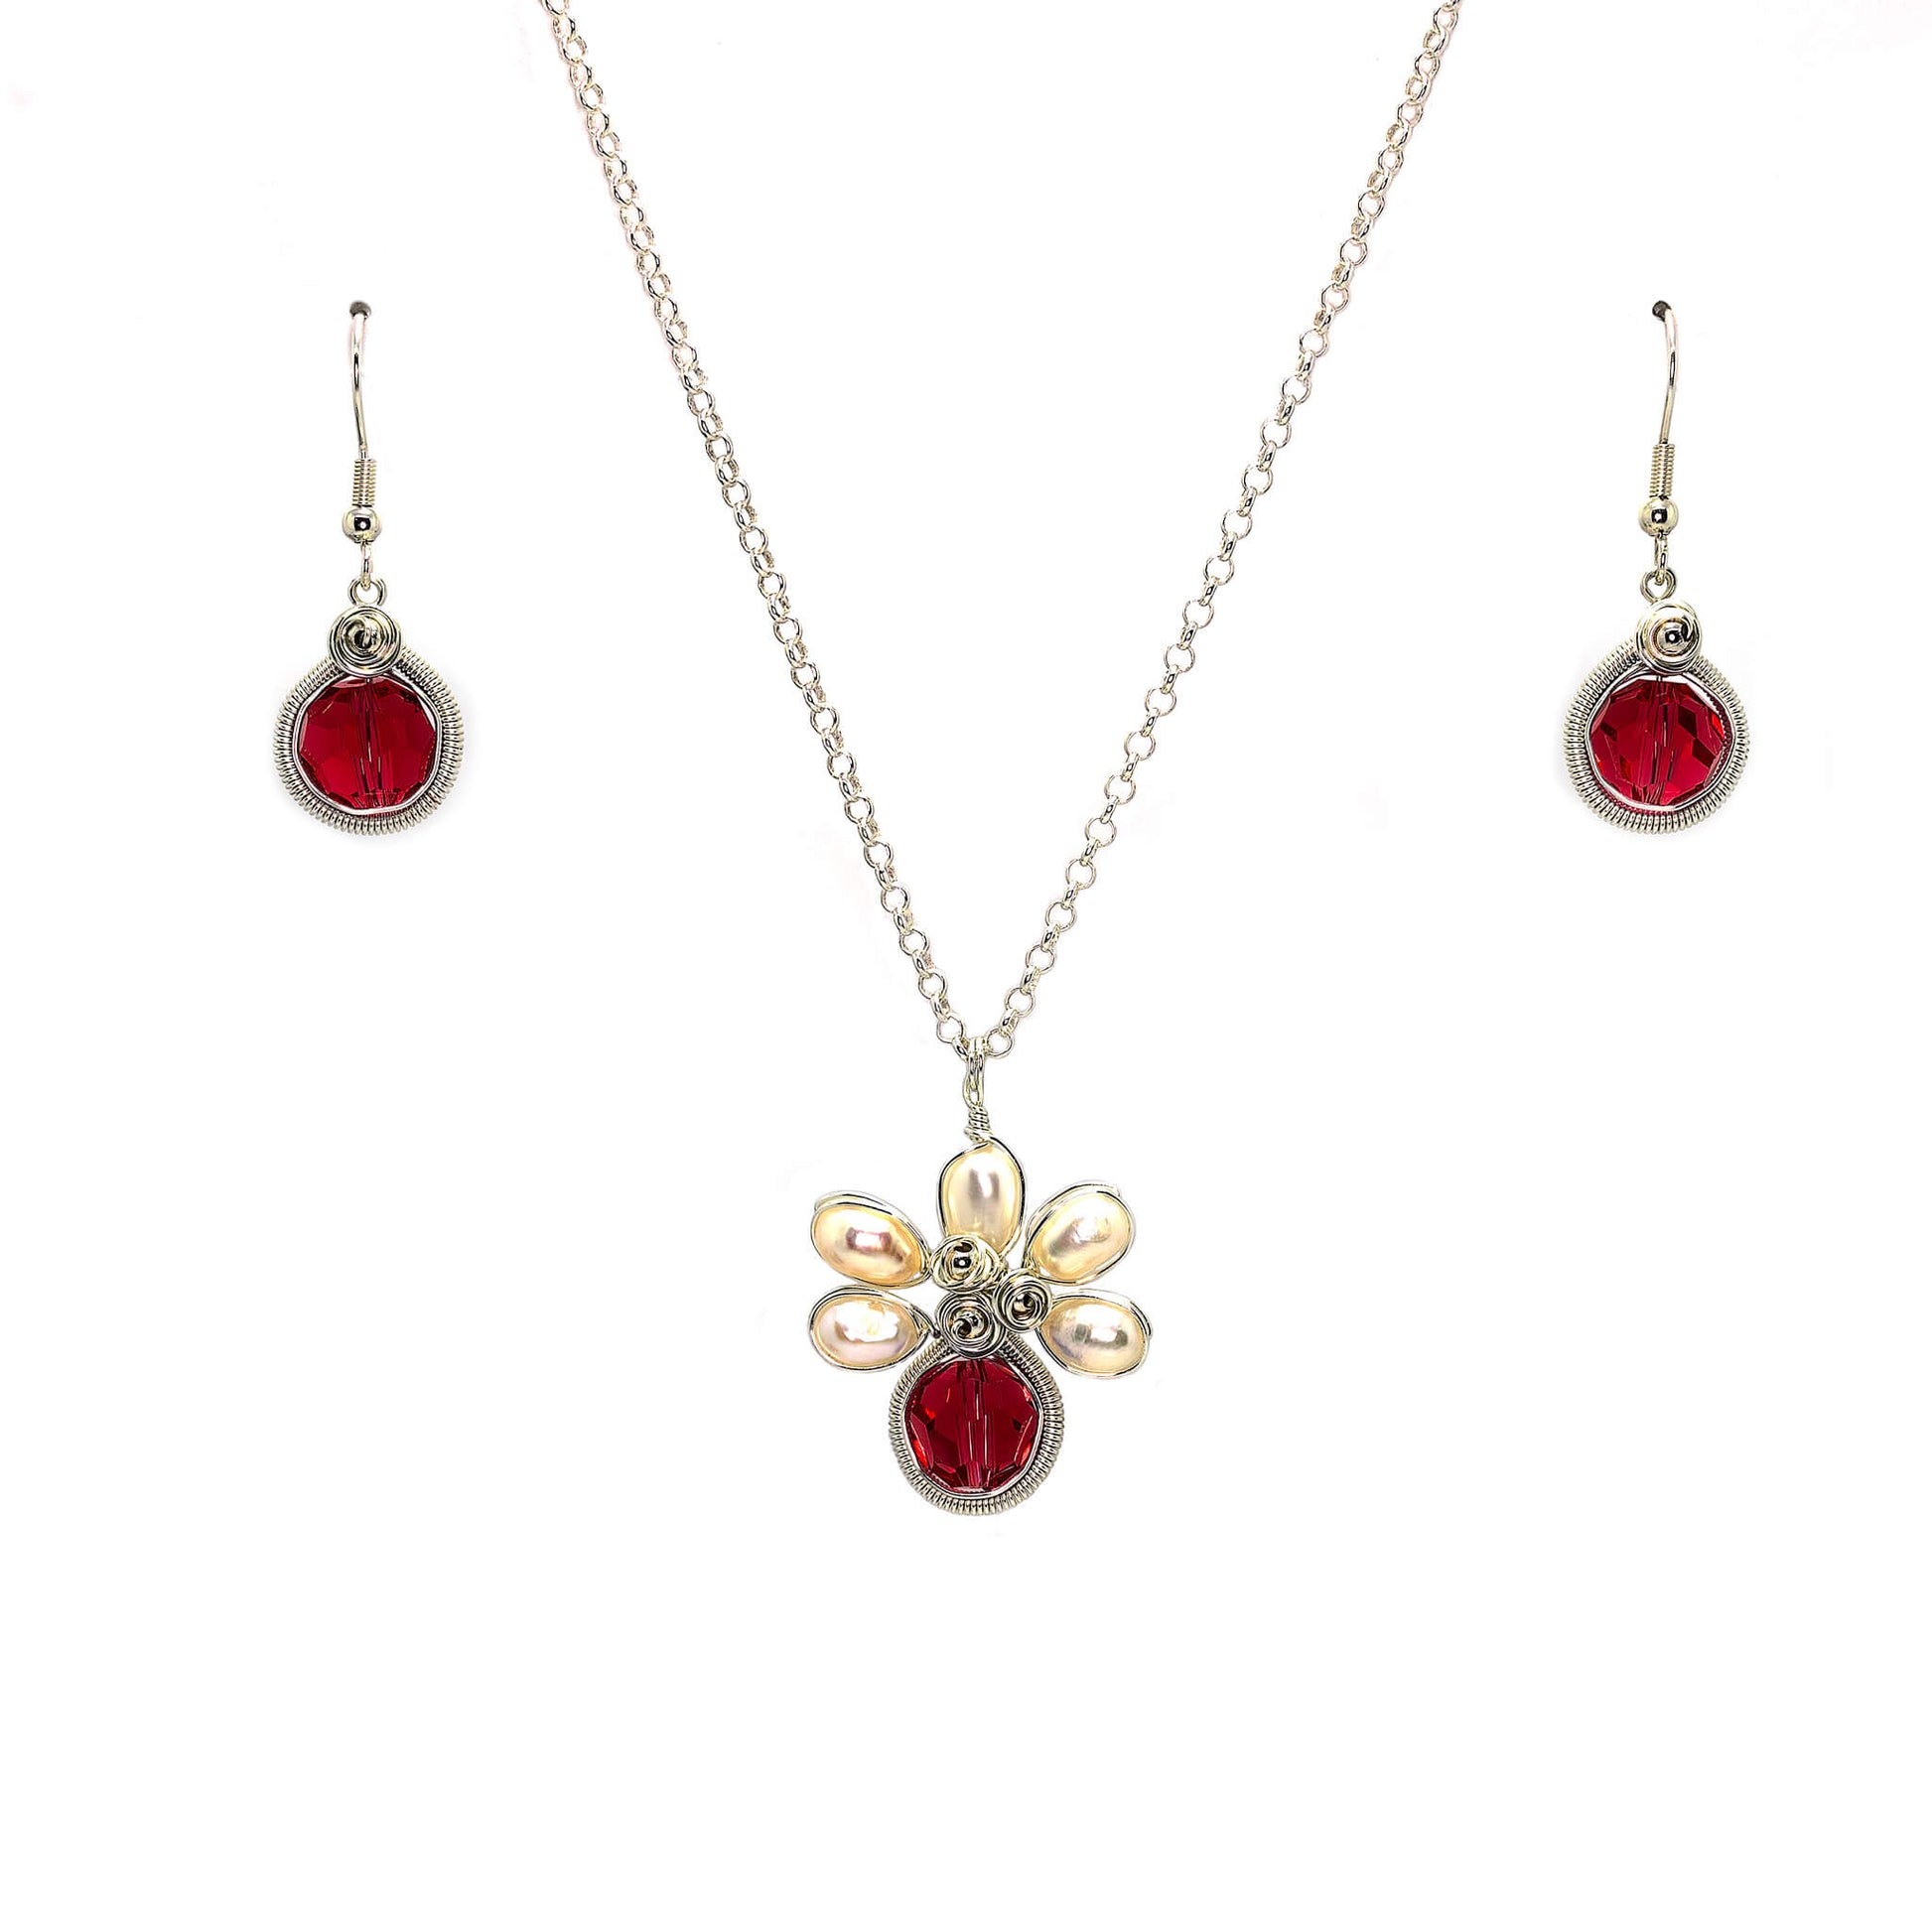 July Birthstone Crystal Necklace.-Earrings Set.  Red Crystals, Fresh Water Pearls  and Silver Set. 9.25 Sterling Silver Chain. 